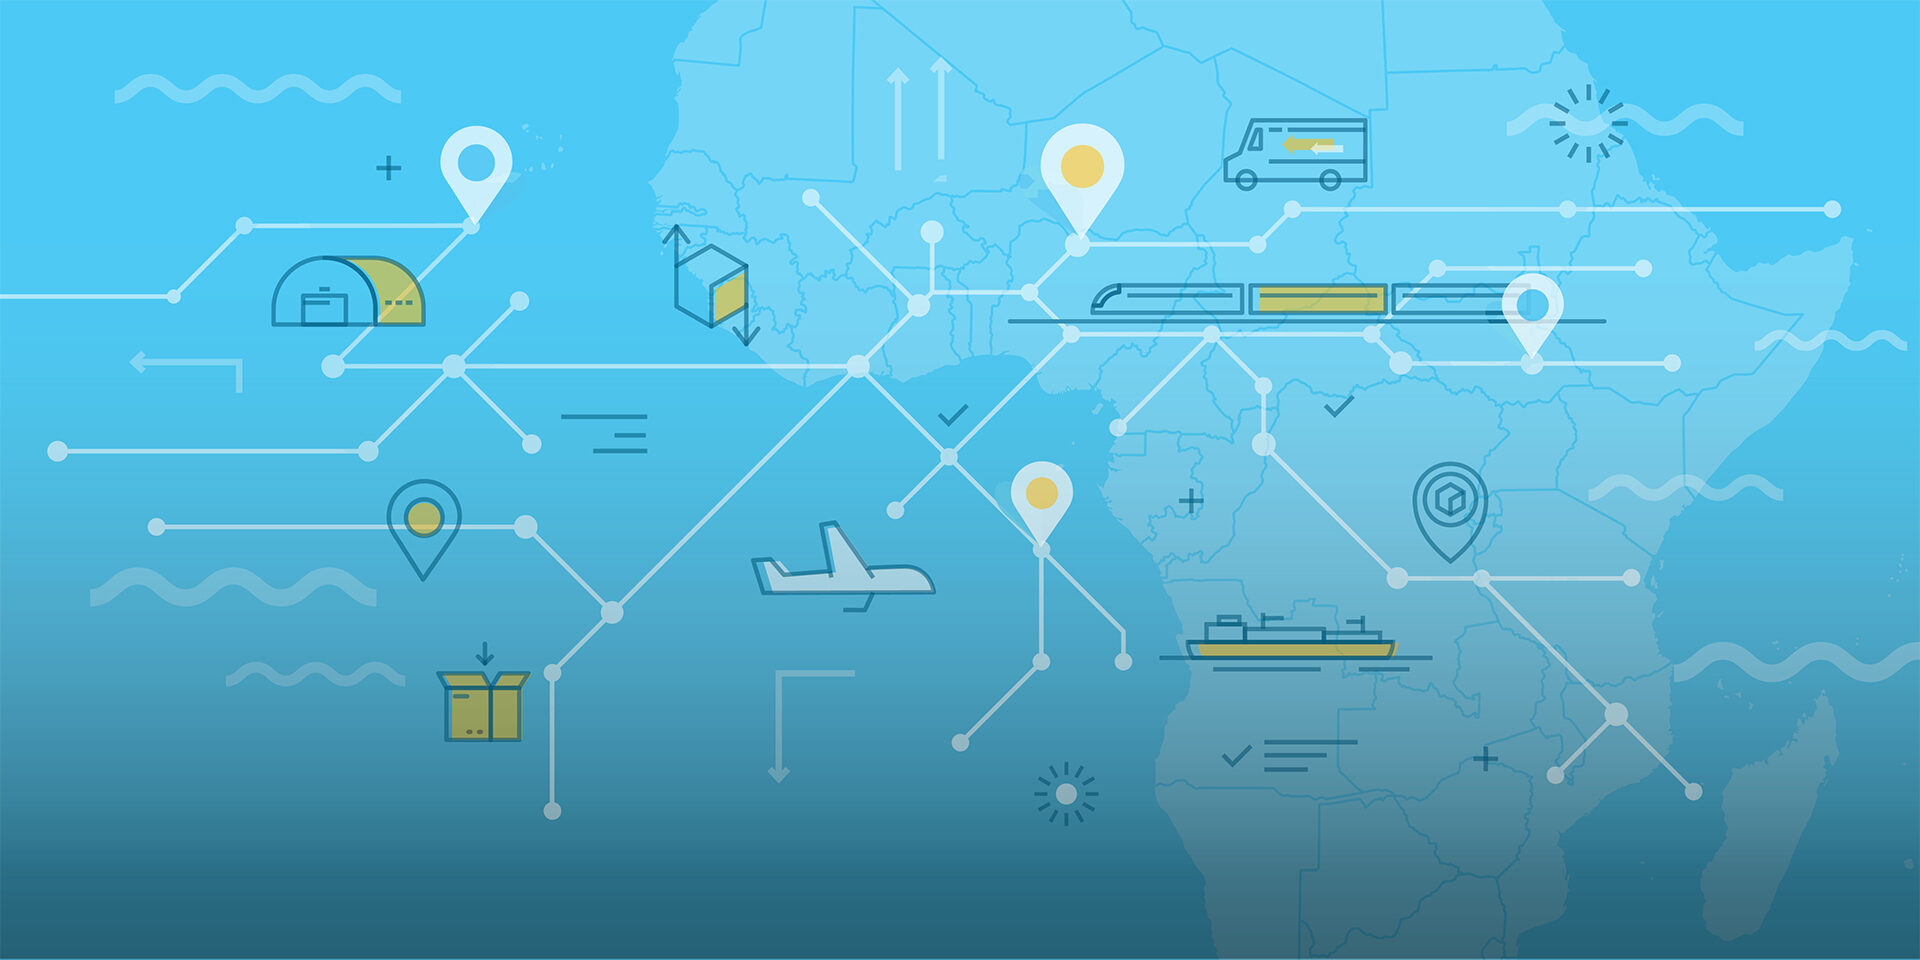 A graphic showing several lines connecting destination points. Includes illustrations of a plane, a bus, a hangar, and a package. The background is blue with a faint image of Africa.